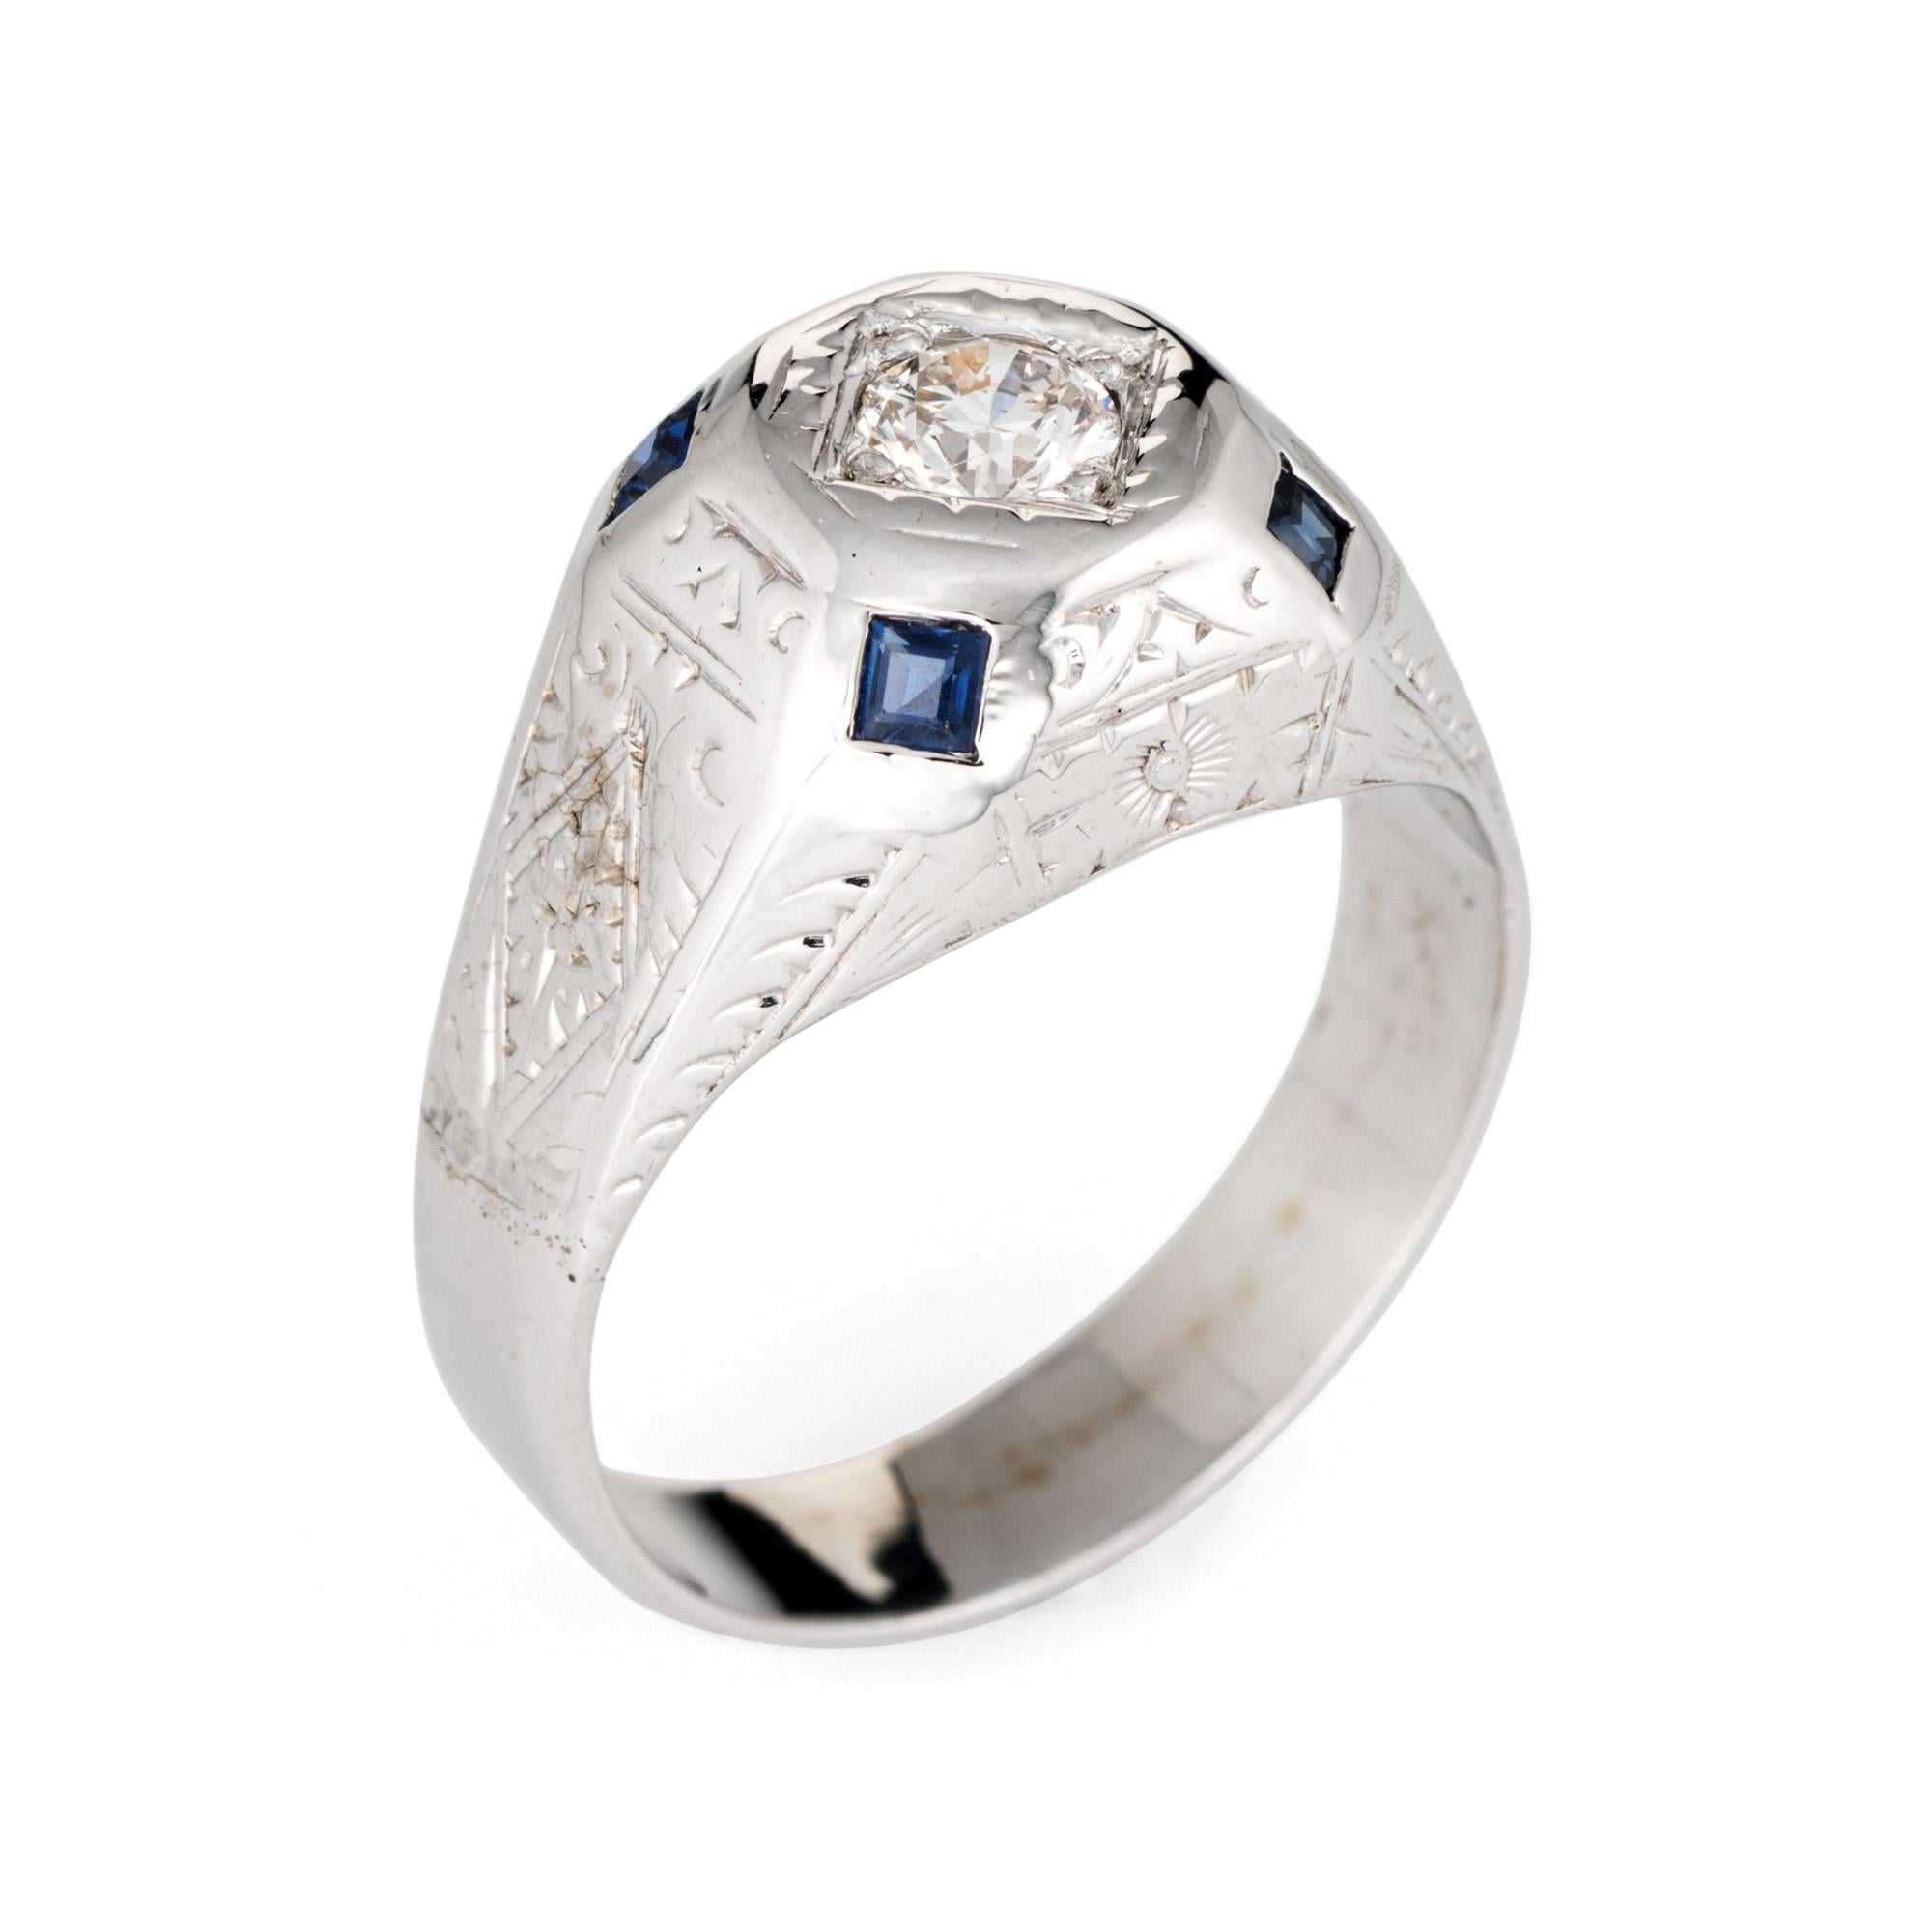 Finely detailed vintage Art Deco era ring (circa 1920s to 1930s) crafted in 14 karat white gold. 

Centrally mounted estimated 0.35 carat old European cut diamond (estimated at I-J color and SI2 clarity). Four square cut sapphires are estimated at